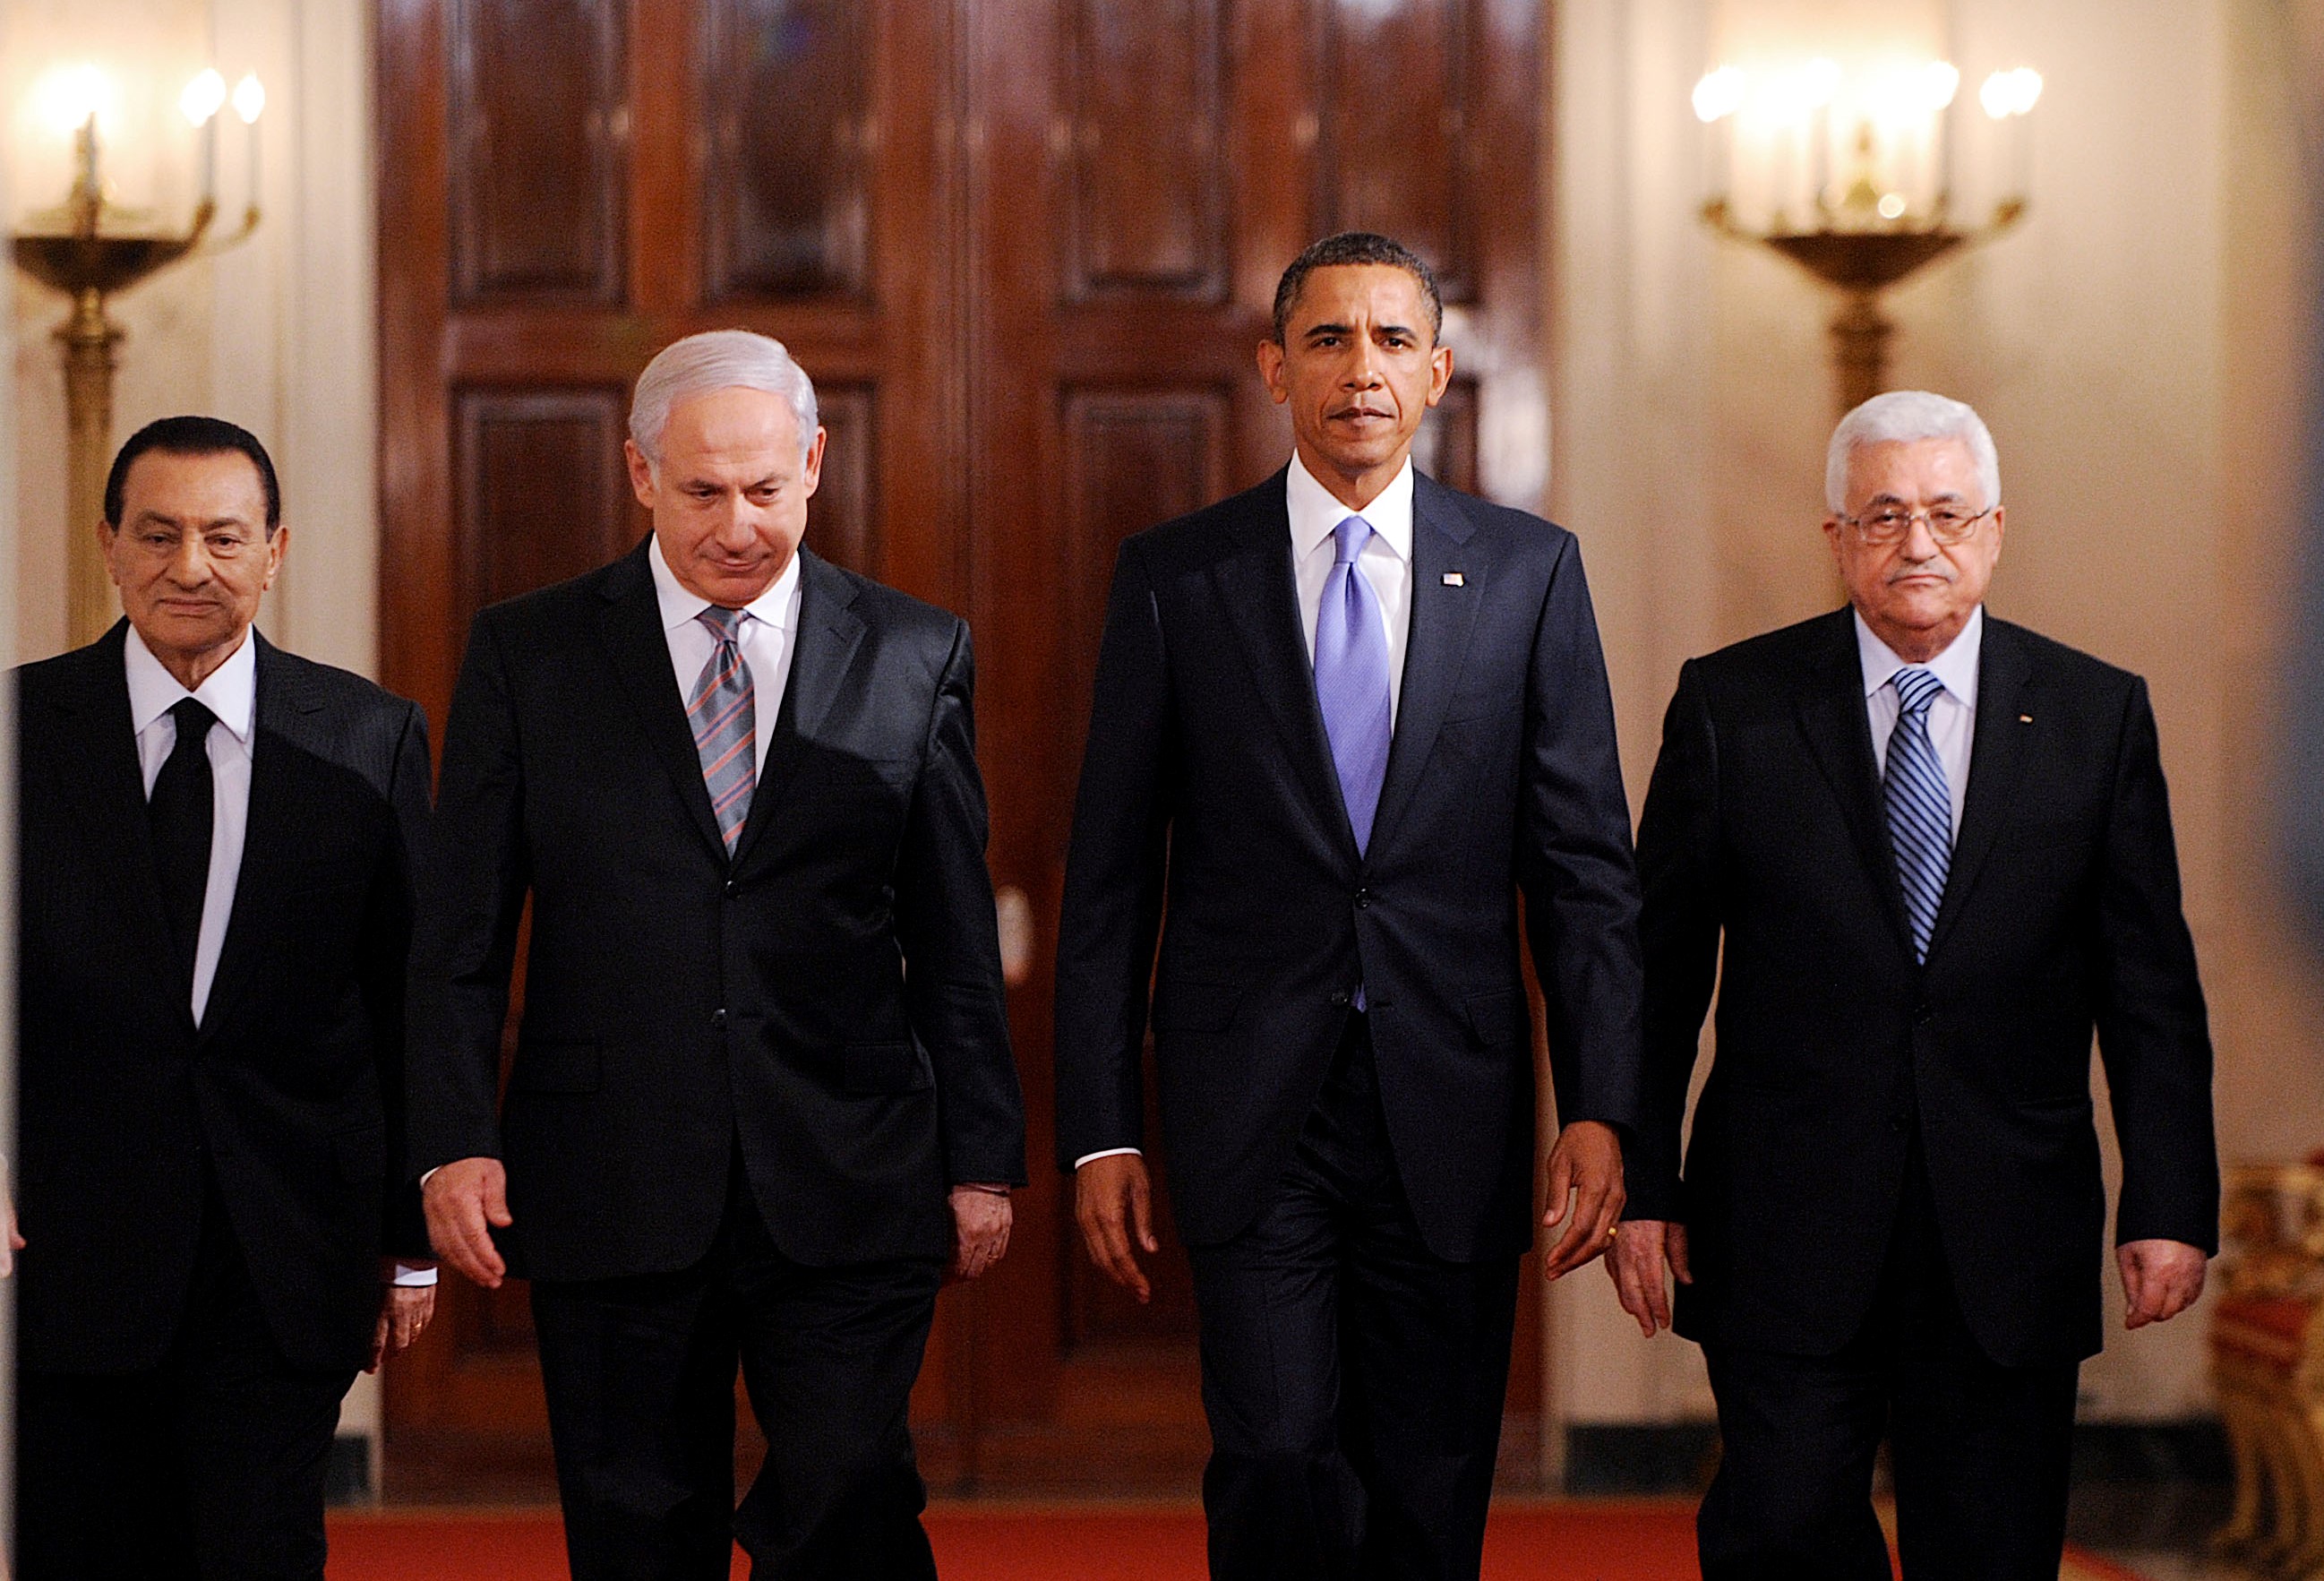   US President Barack Obama walks with Middle East leaders in the East Room of the White House in Washington, DC, USA, on 1 September, 2010 (Reuters)